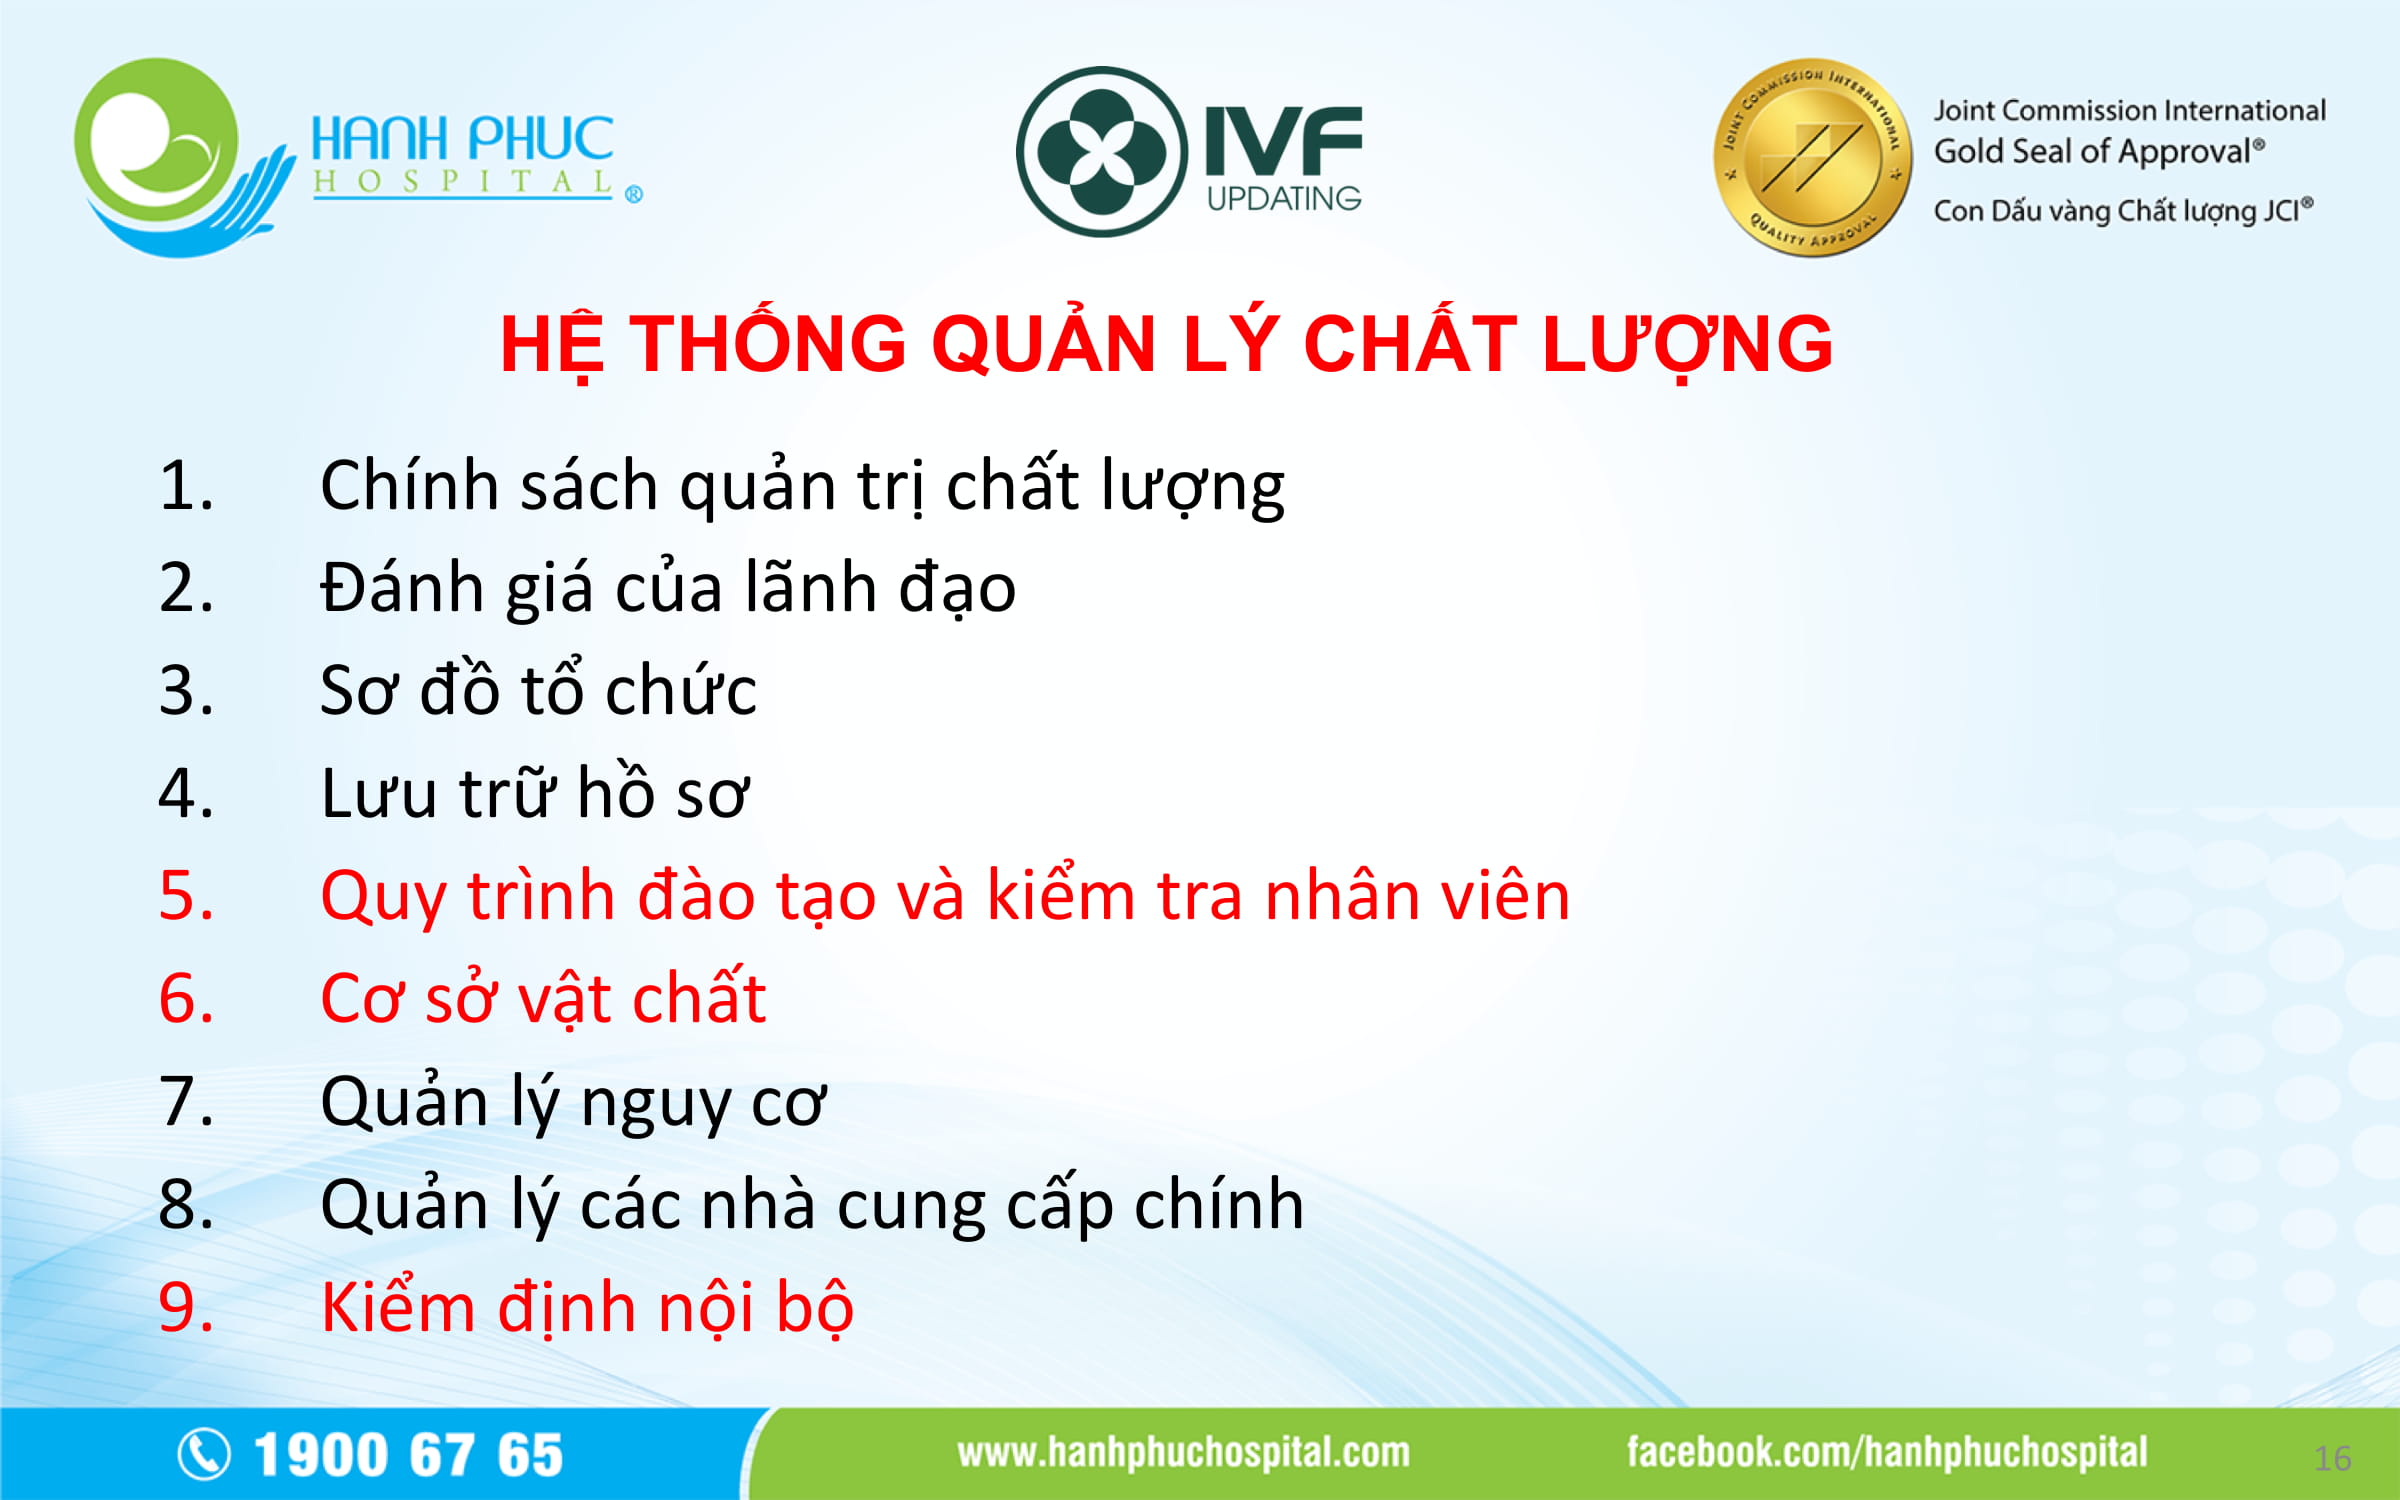 BS Vo Thien An Report_IVF UPDATING 5-16